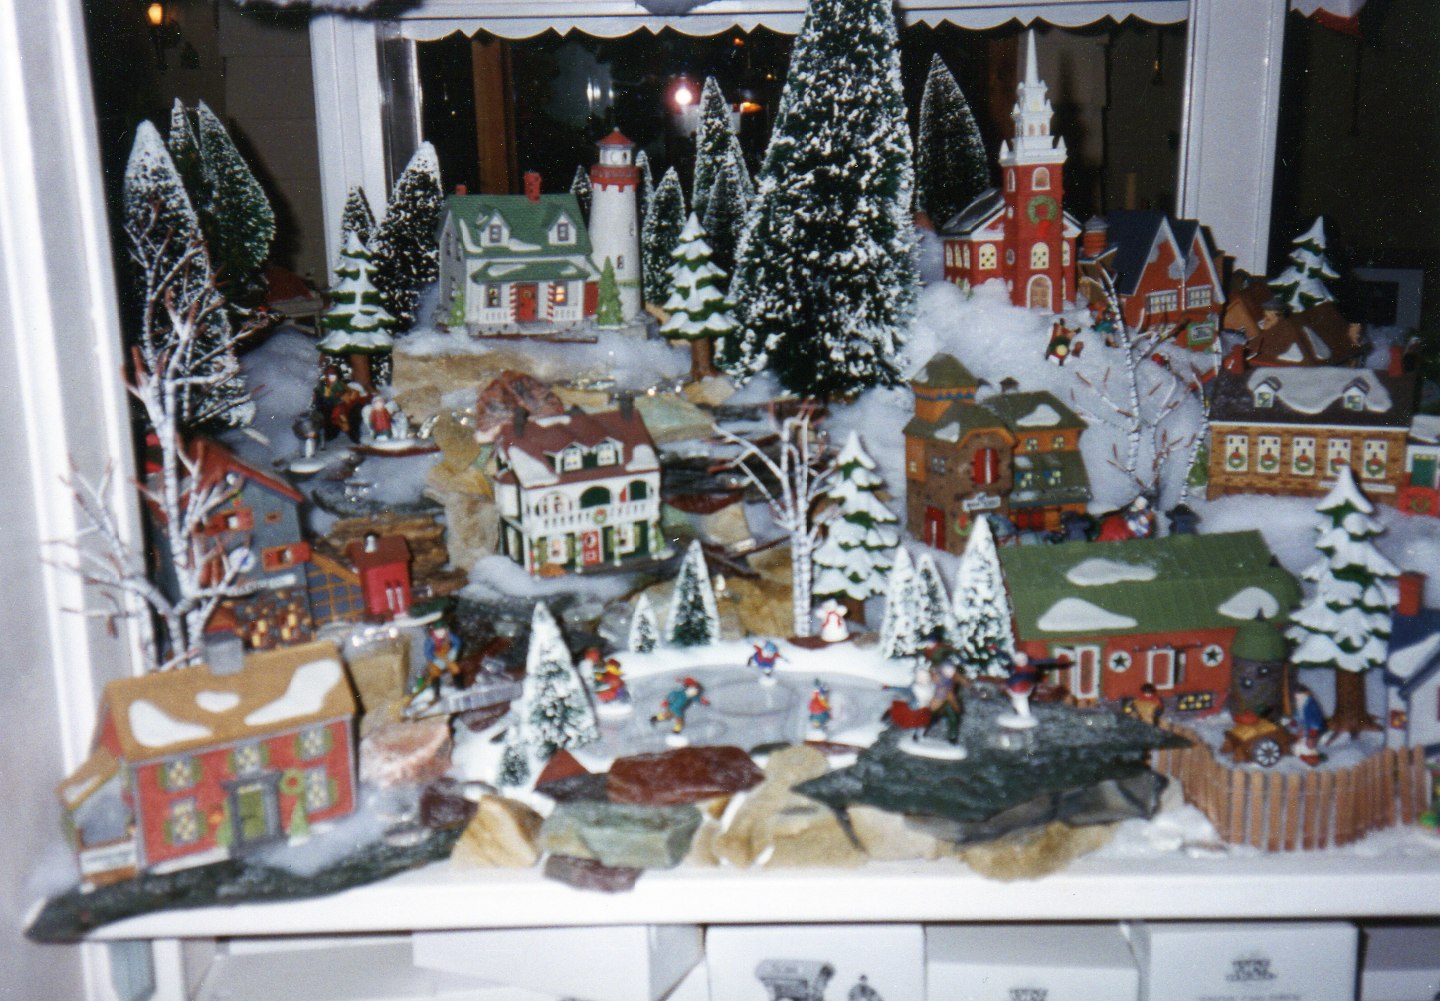 Urbanchristmas decorating ideas: Christmas Villages: One 